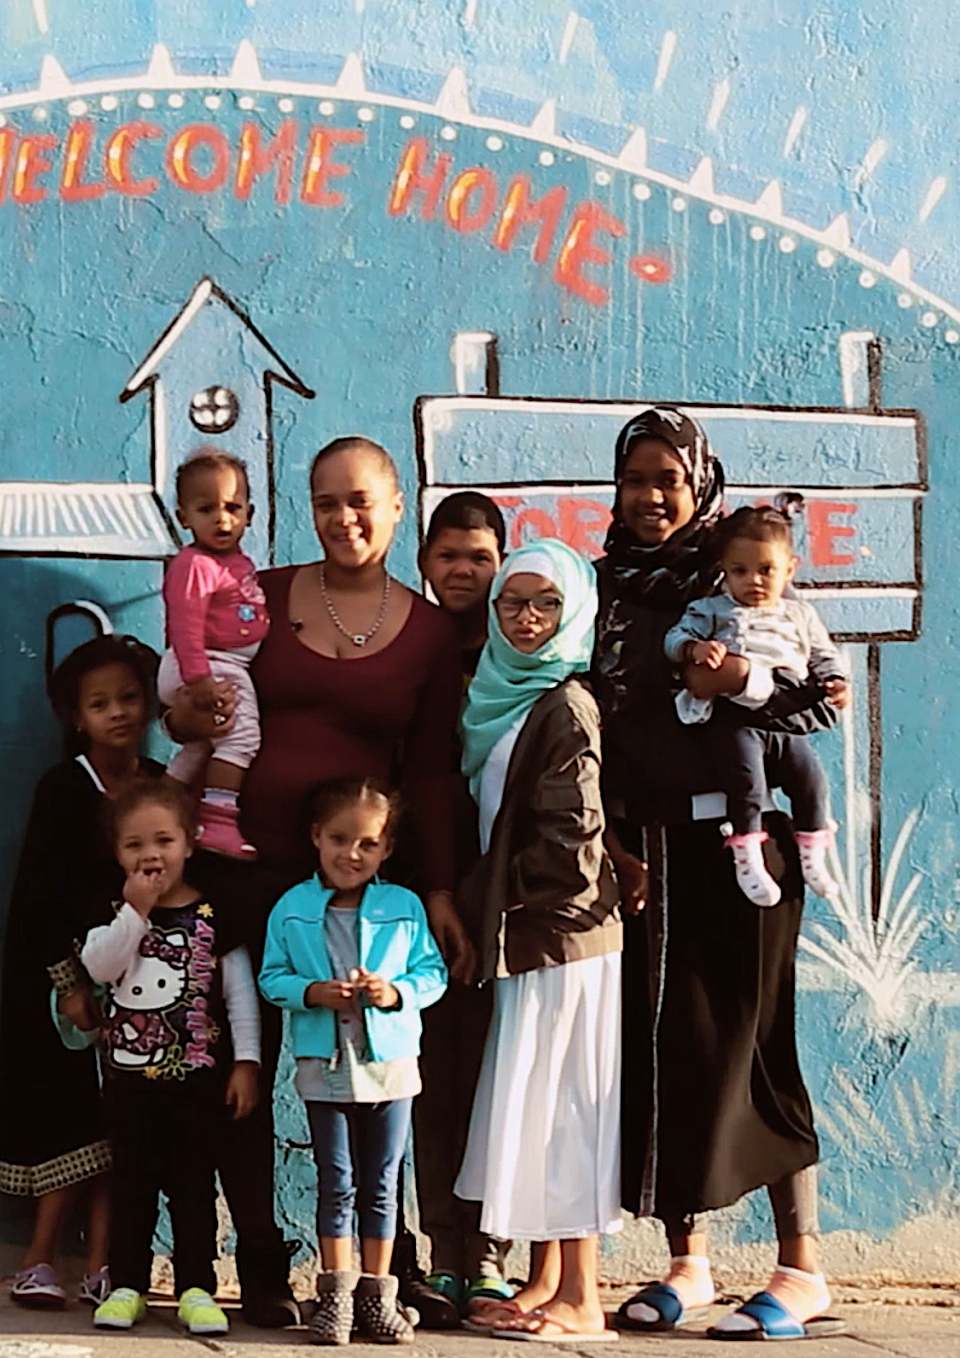 photo with women and children standing in front of mural that reads welcome home